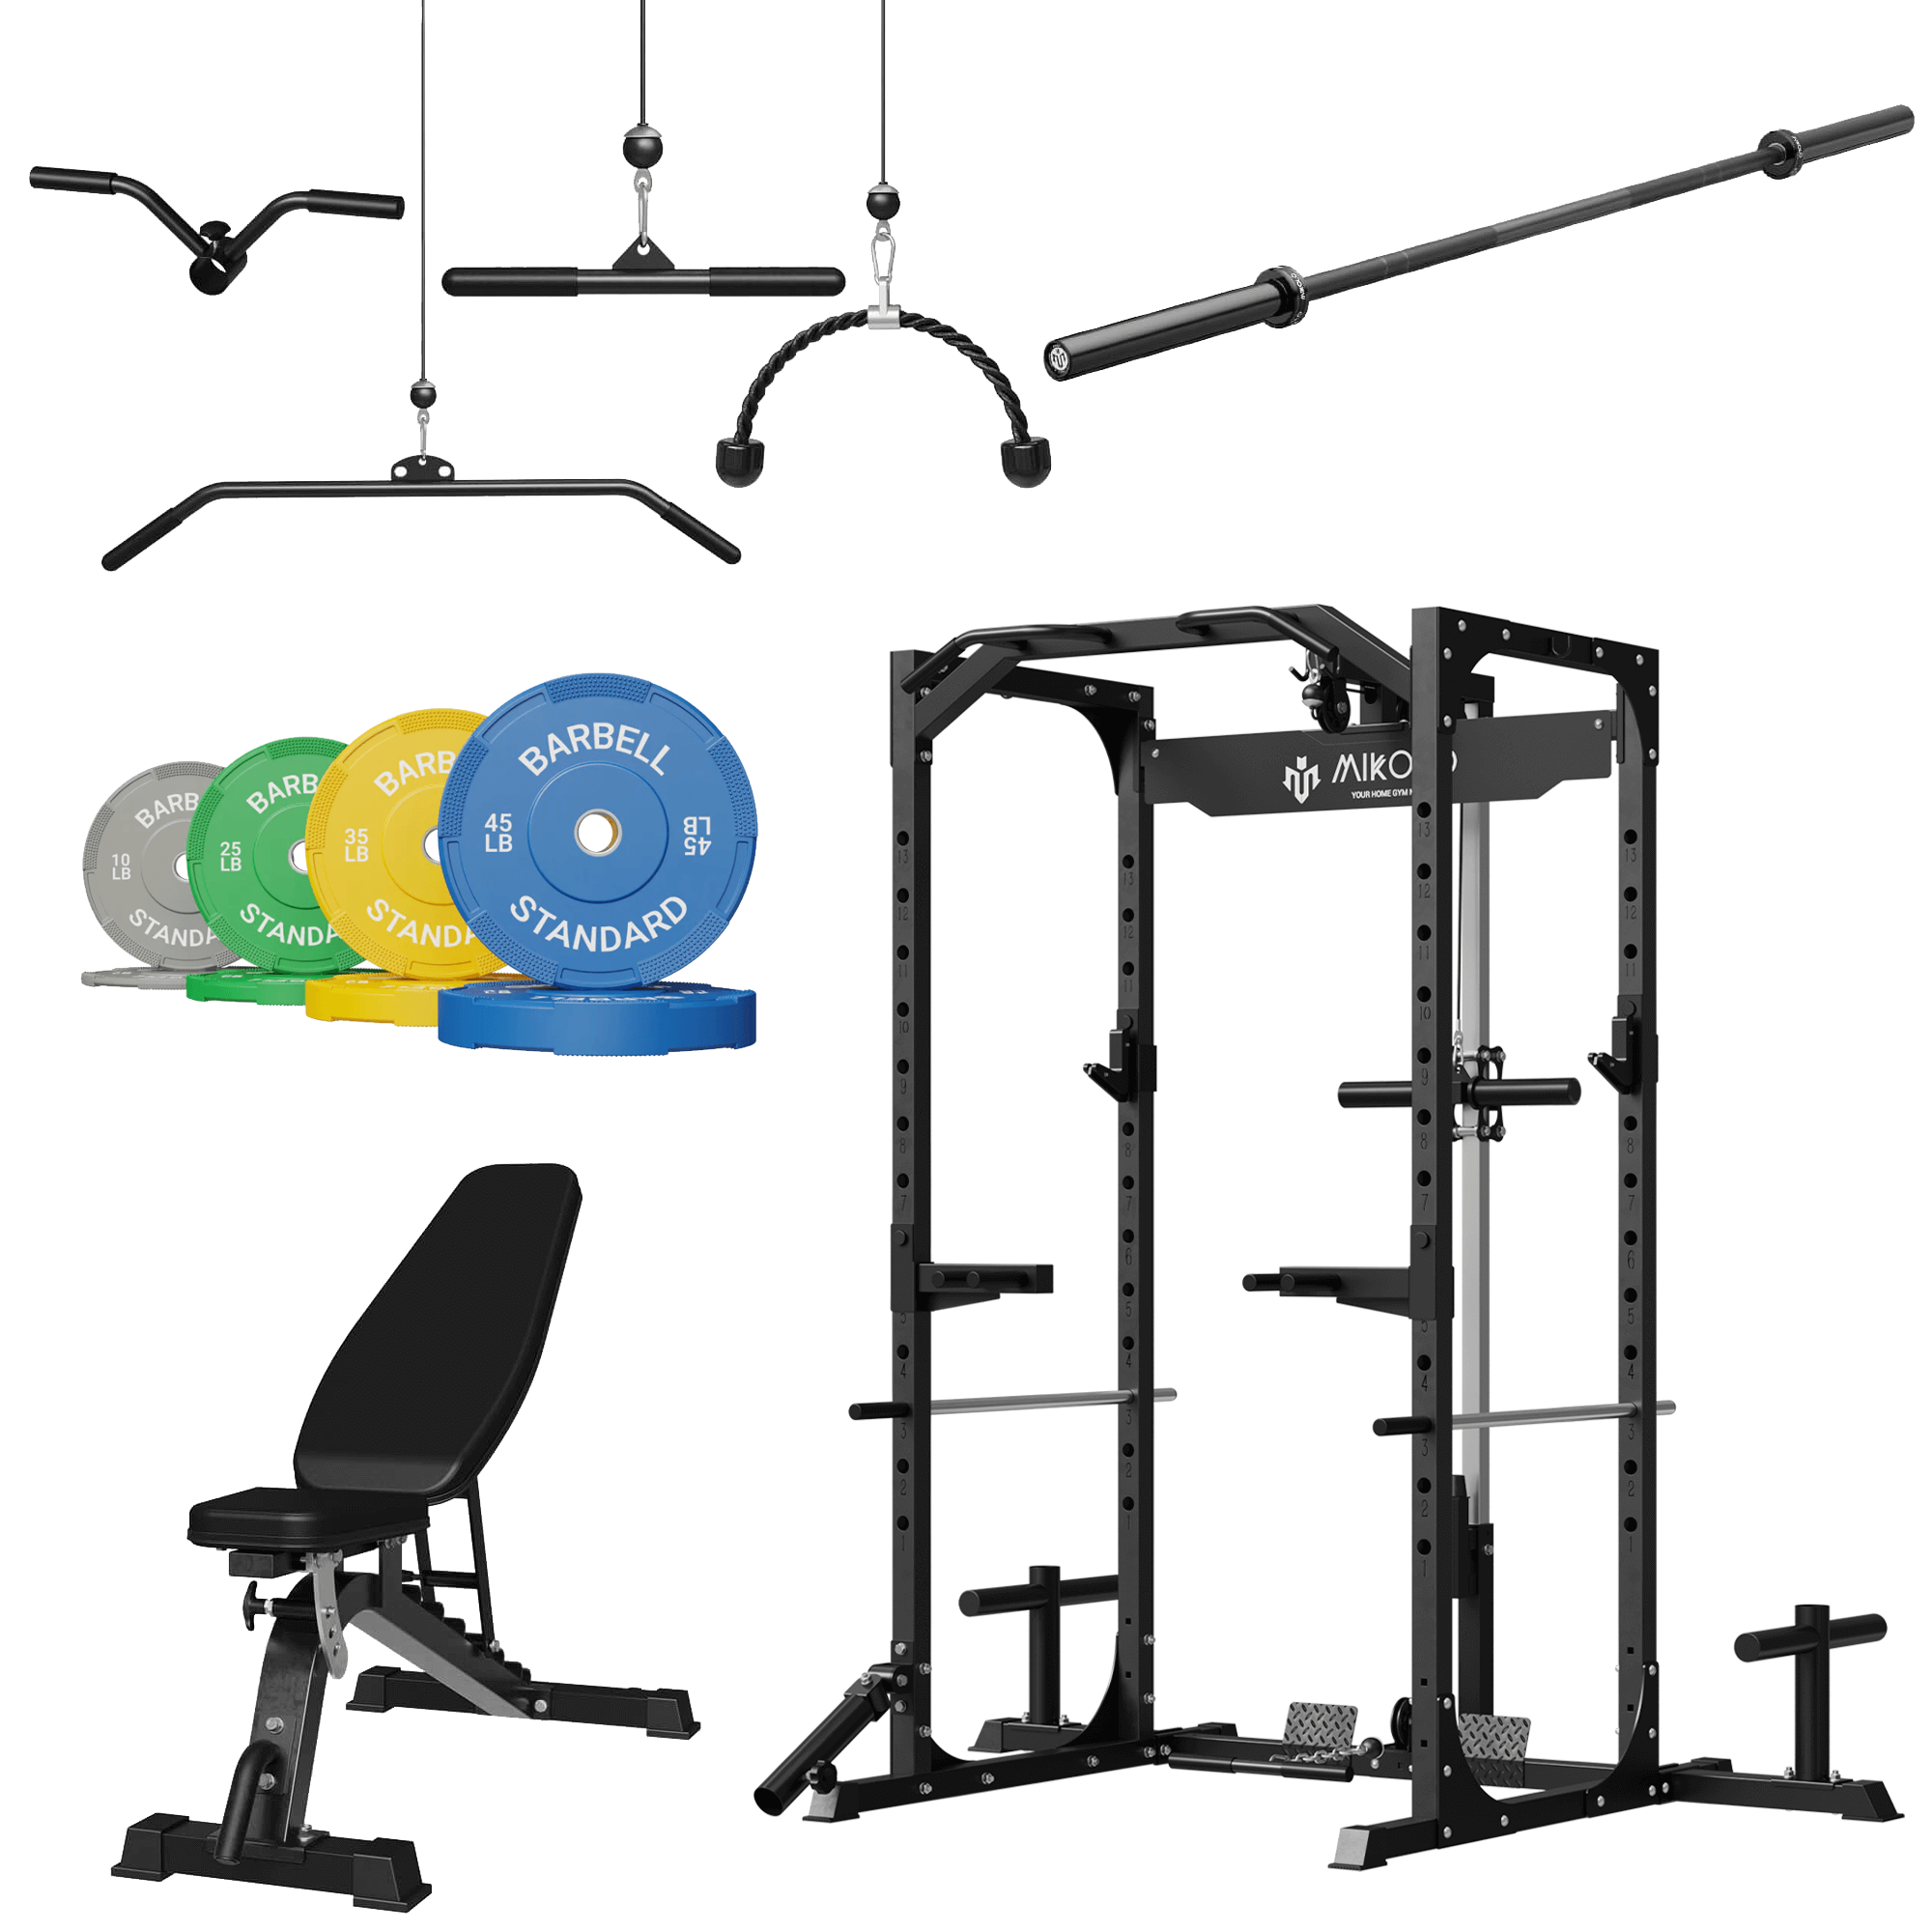 MIKOLO F4 Home Gym Package